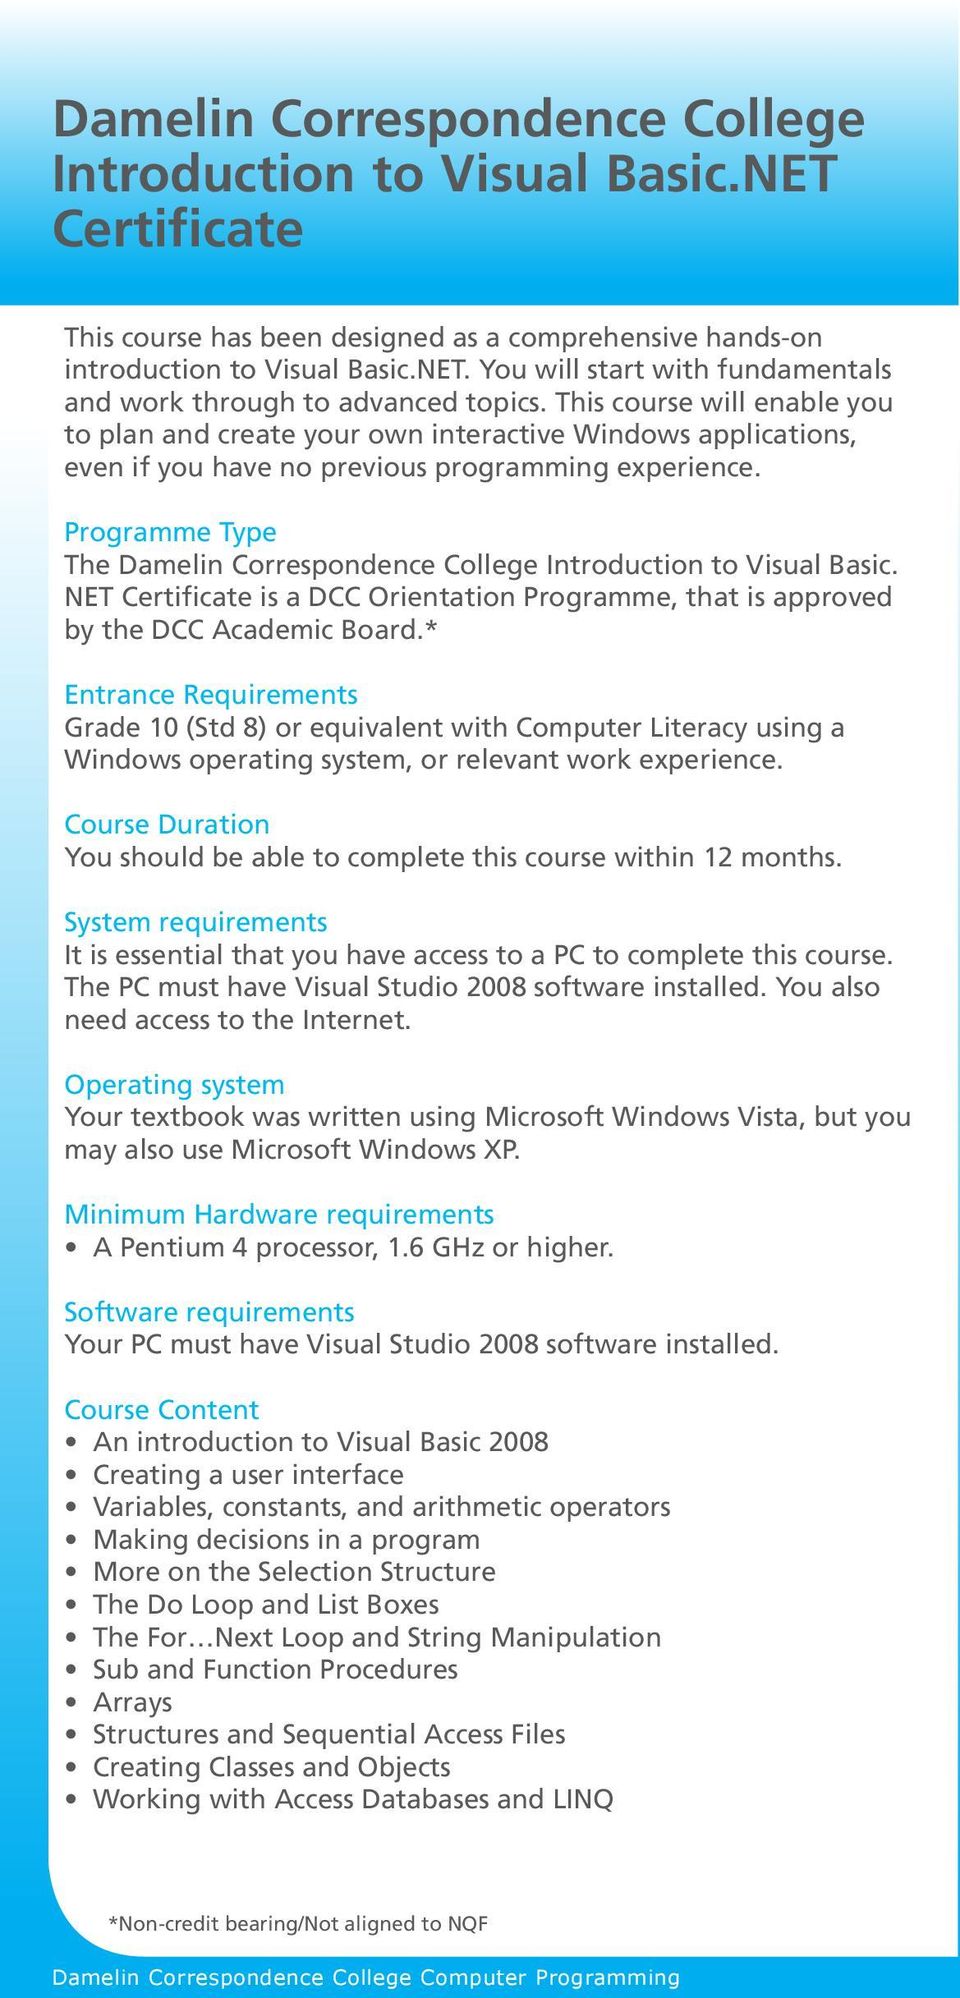 Programme Type The Damelin Correspondence College Introduction to Visual Basic. NET Certificate is a DCC Orientation Programme, that is approved by the DCC Academic Board.